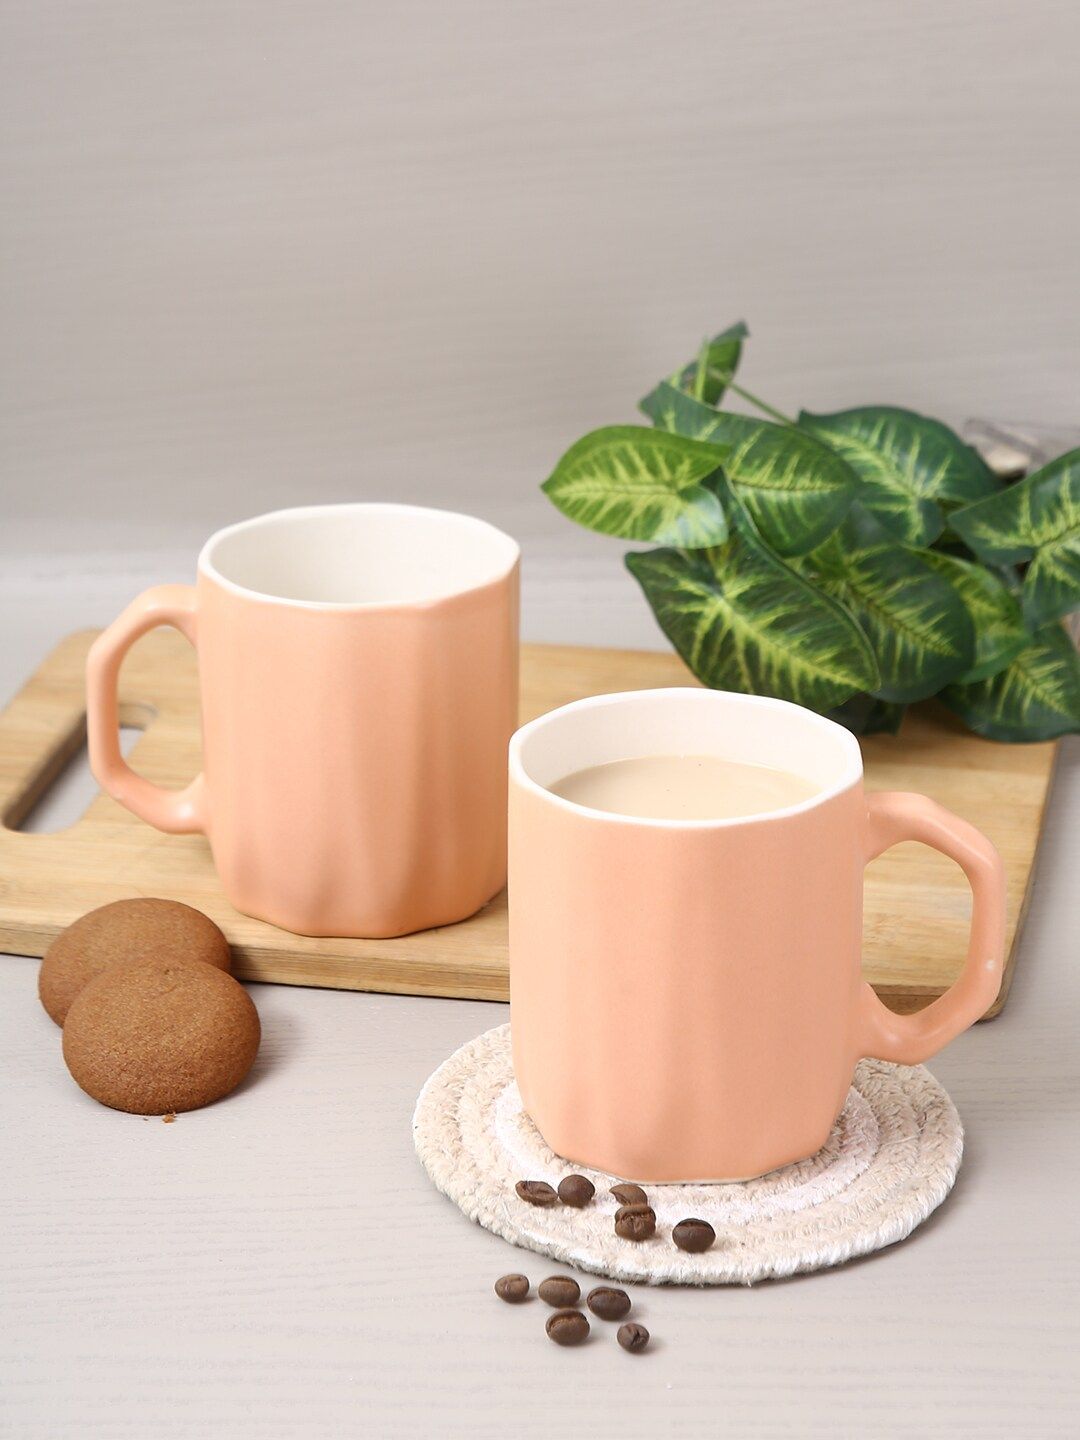 Aapno Rajasthan Set Of 2 Peach-Coloured Textured Ceramic Glossy Coffee Mugs Price in India